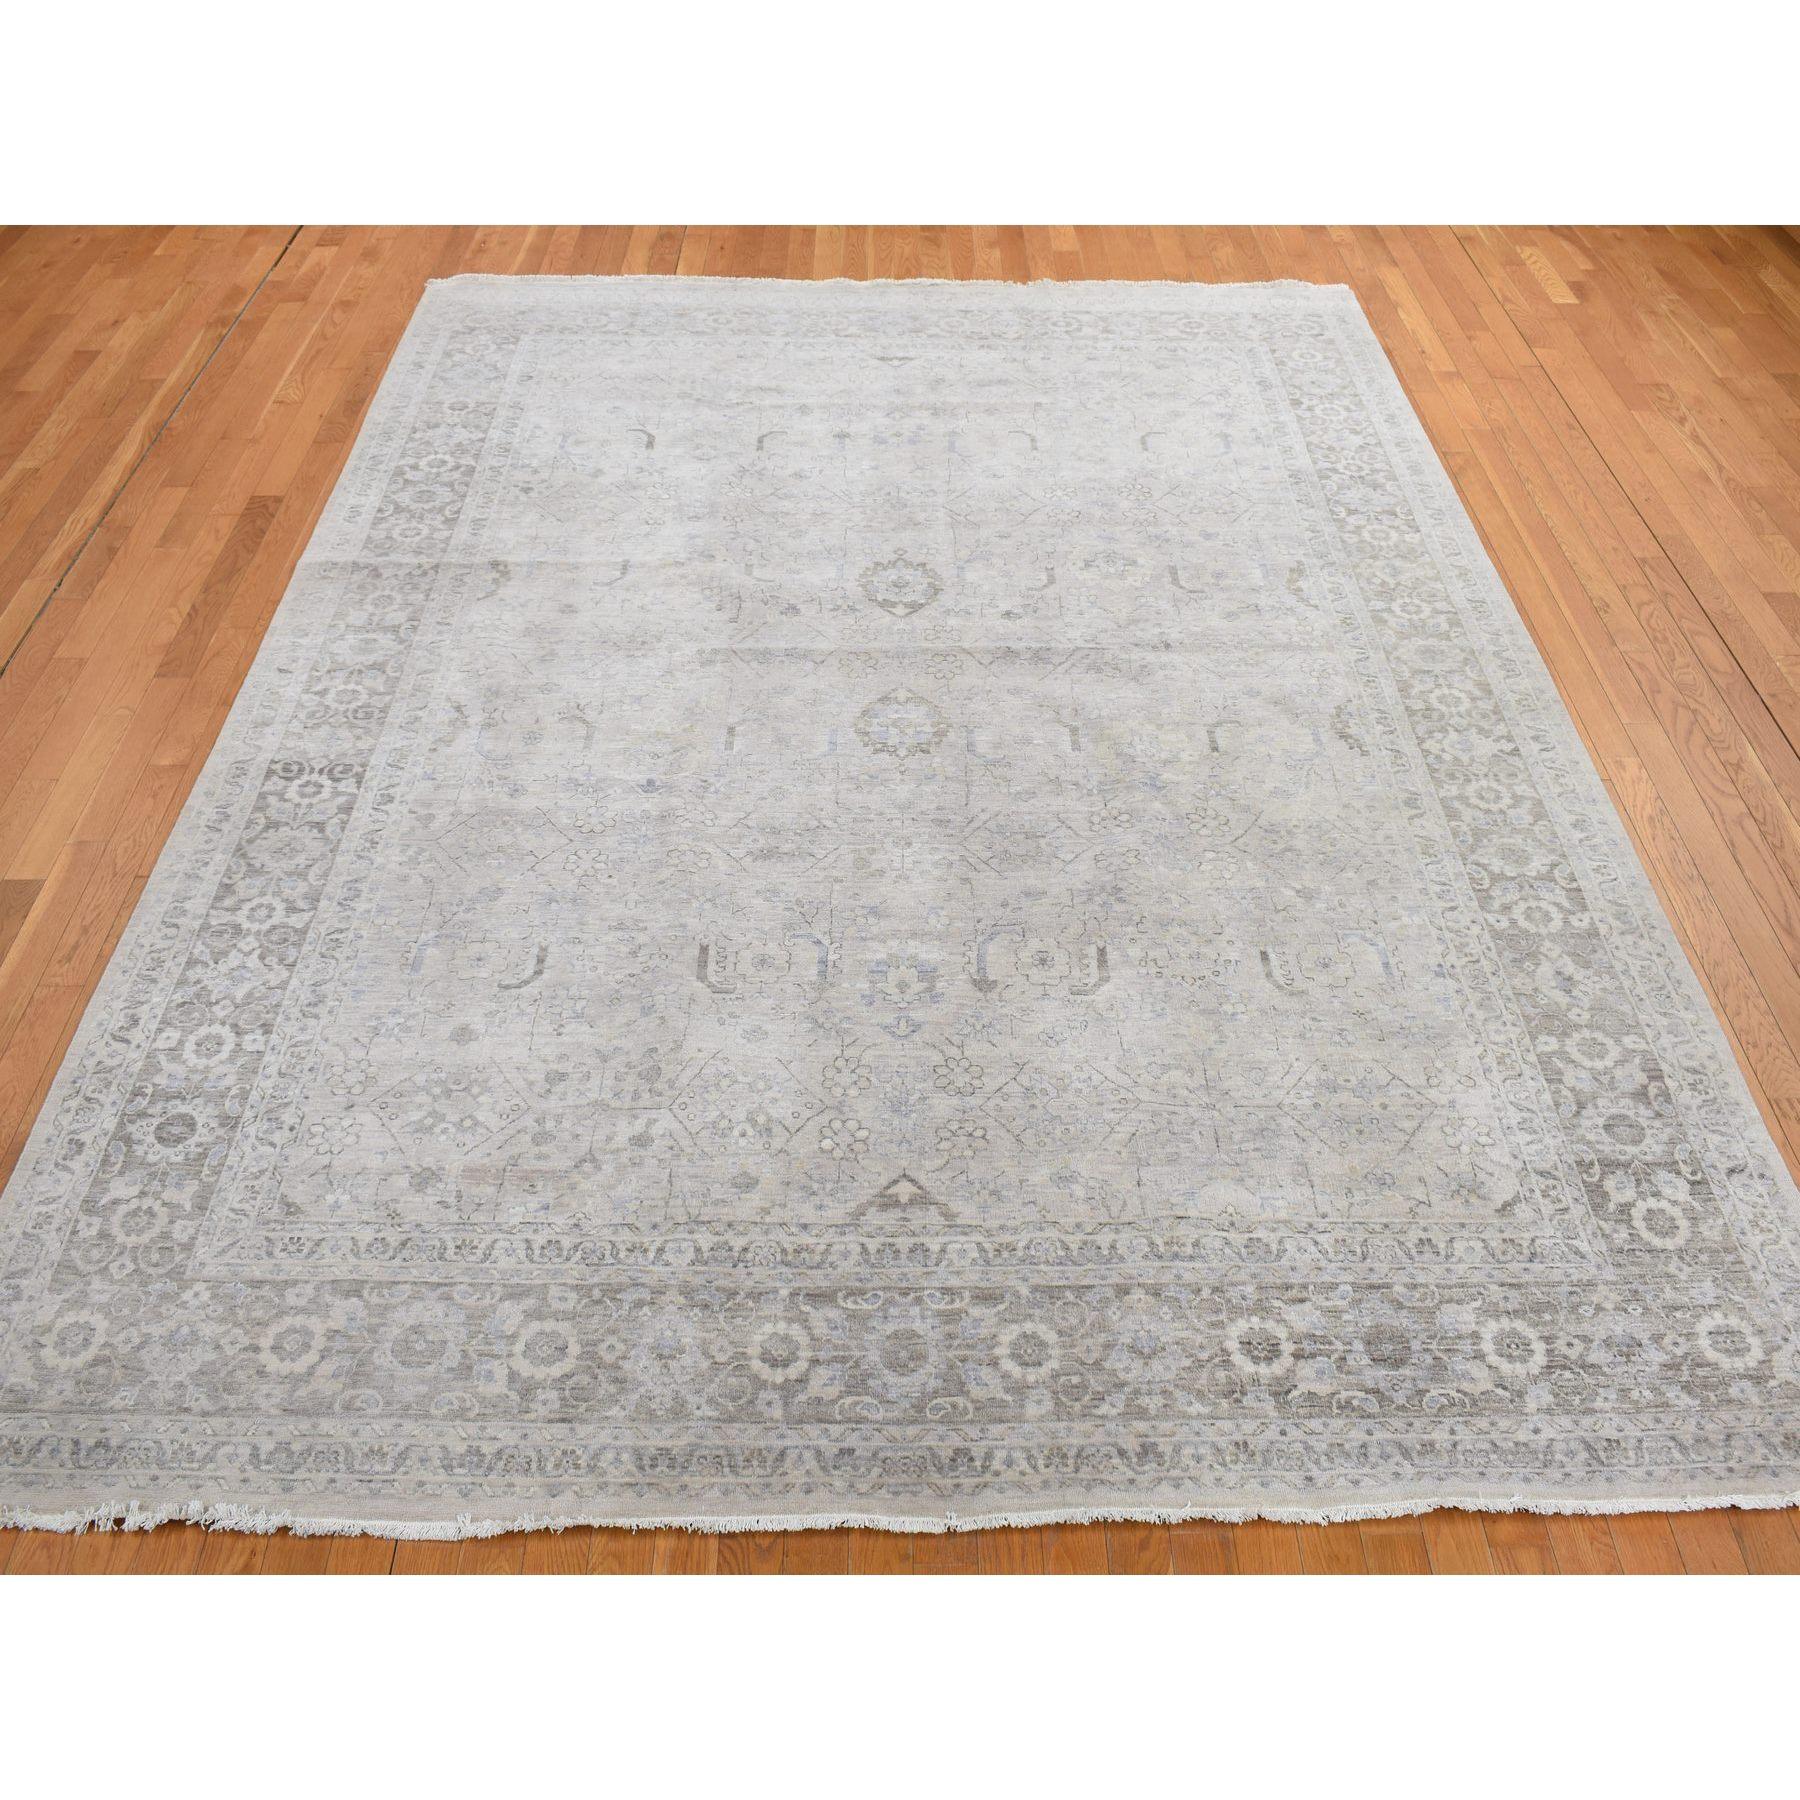 Medieval Chateau Gray Hand Knotted Wool Rustic Persian Sultanabad Influence Rug 9'1